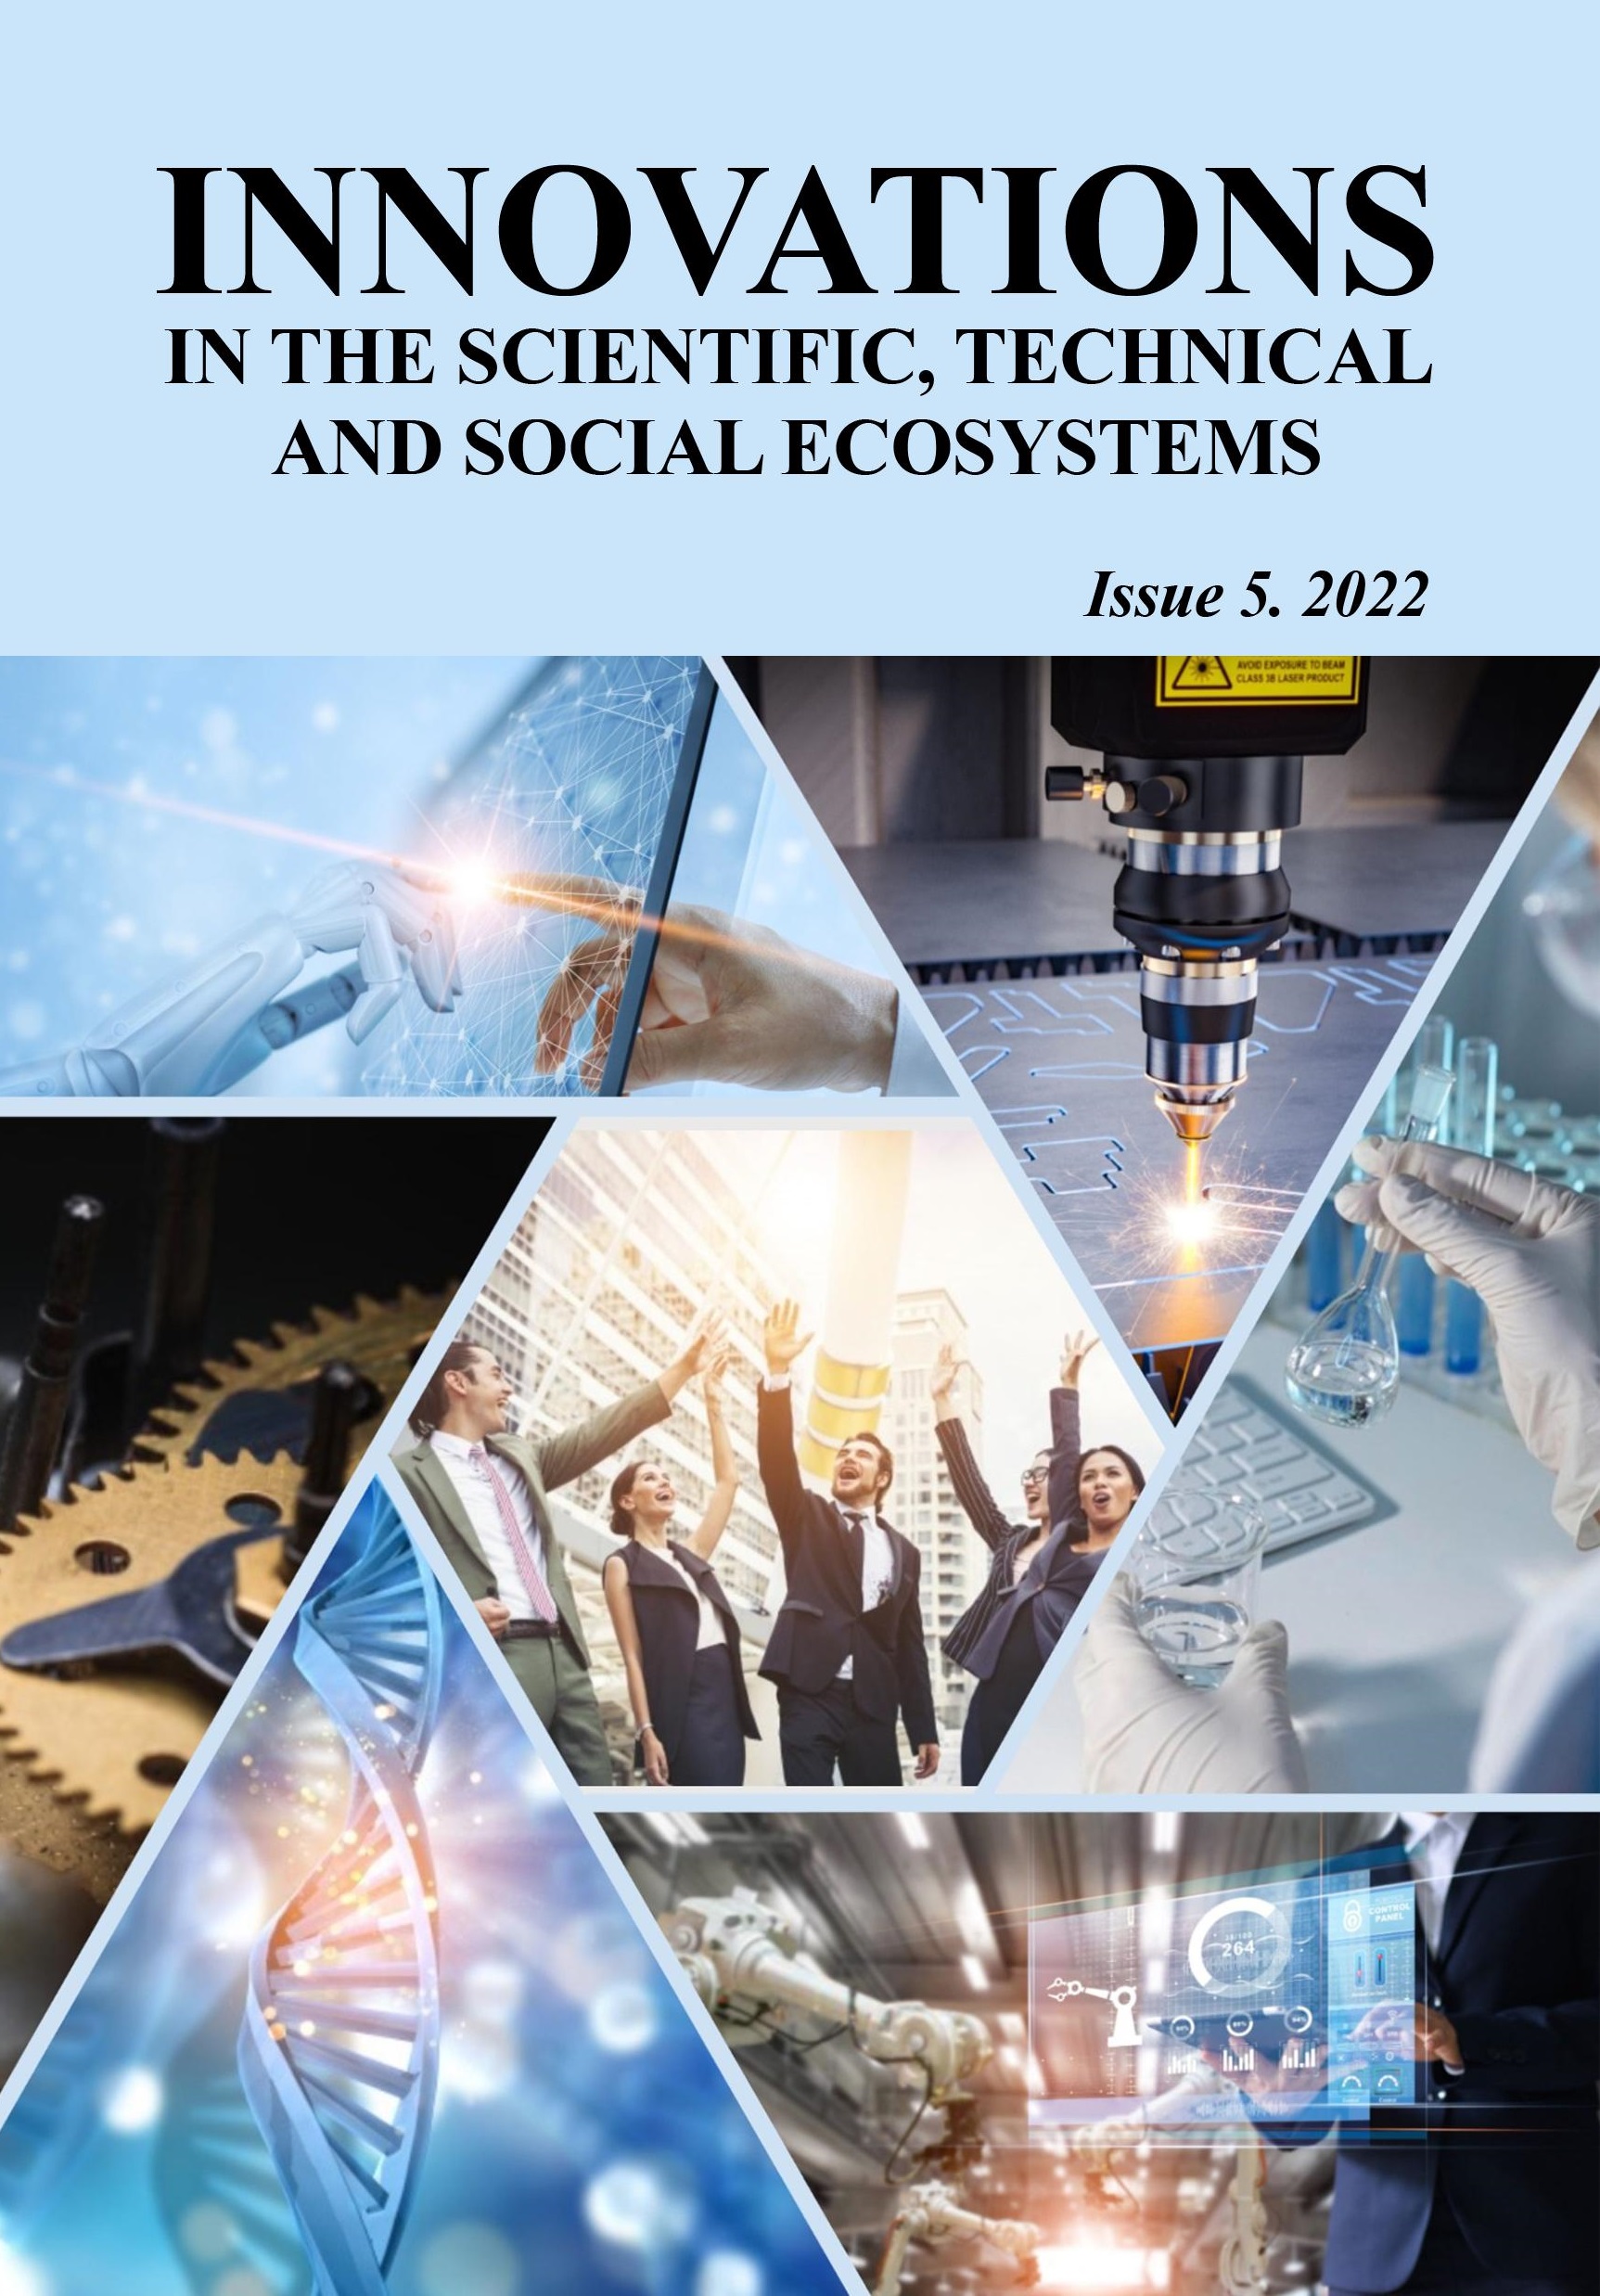 					View Vol. 1 No. 5 (2023): INNOVATIONS IN THE SCIENTIFIC, TECHNICAL AND SOCIAL ECOSYSTEMS
				